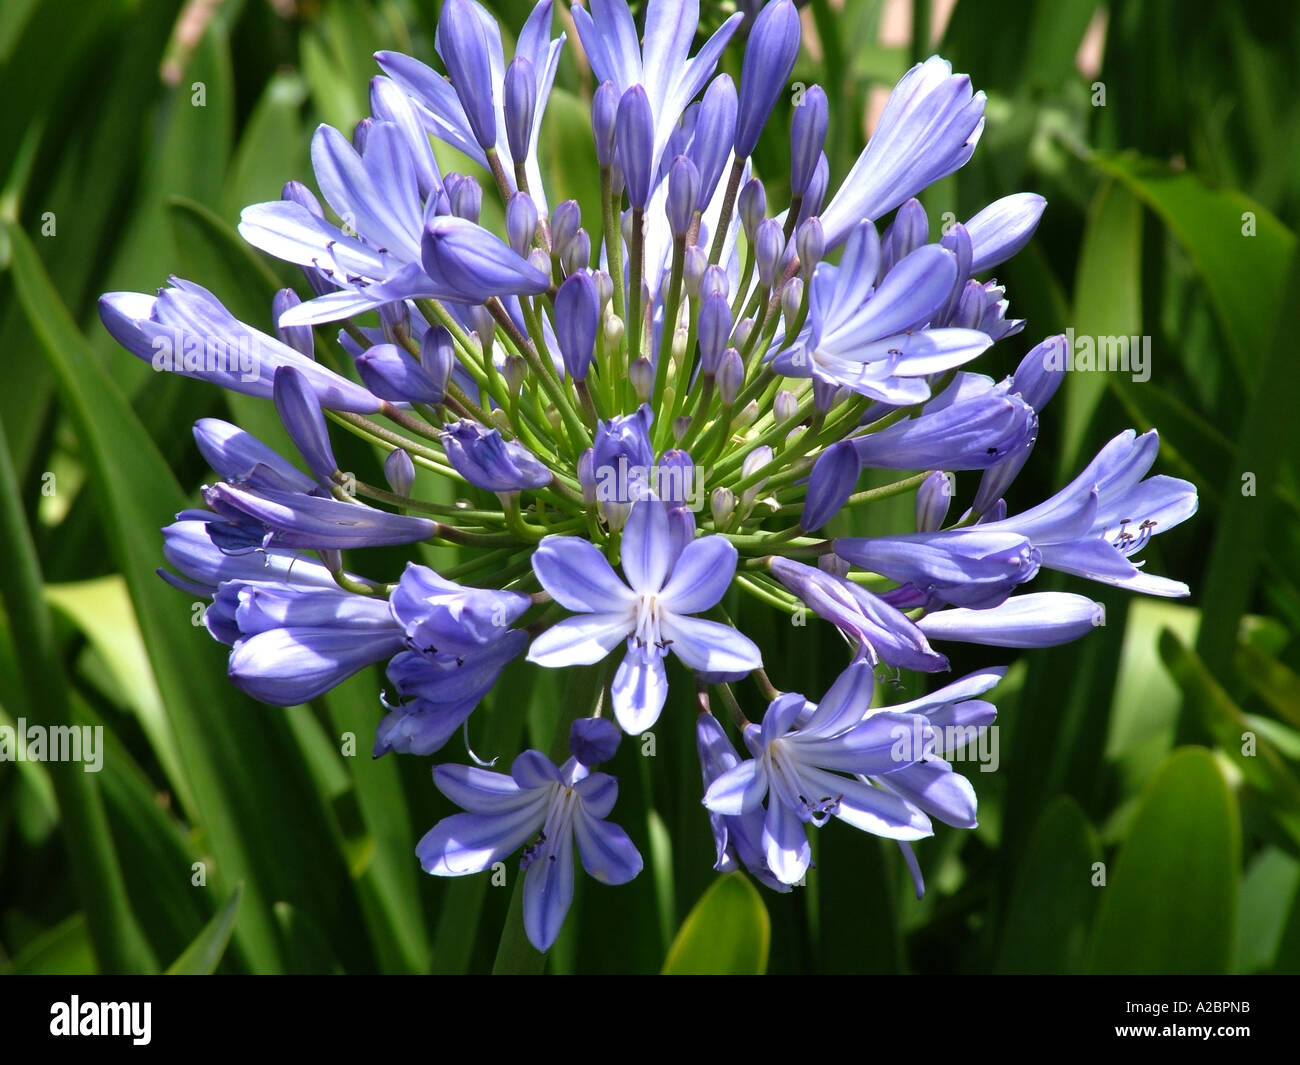 Flower bloom of the Agapanthus or African Lily liliaceous South Africa plant Stock Photo